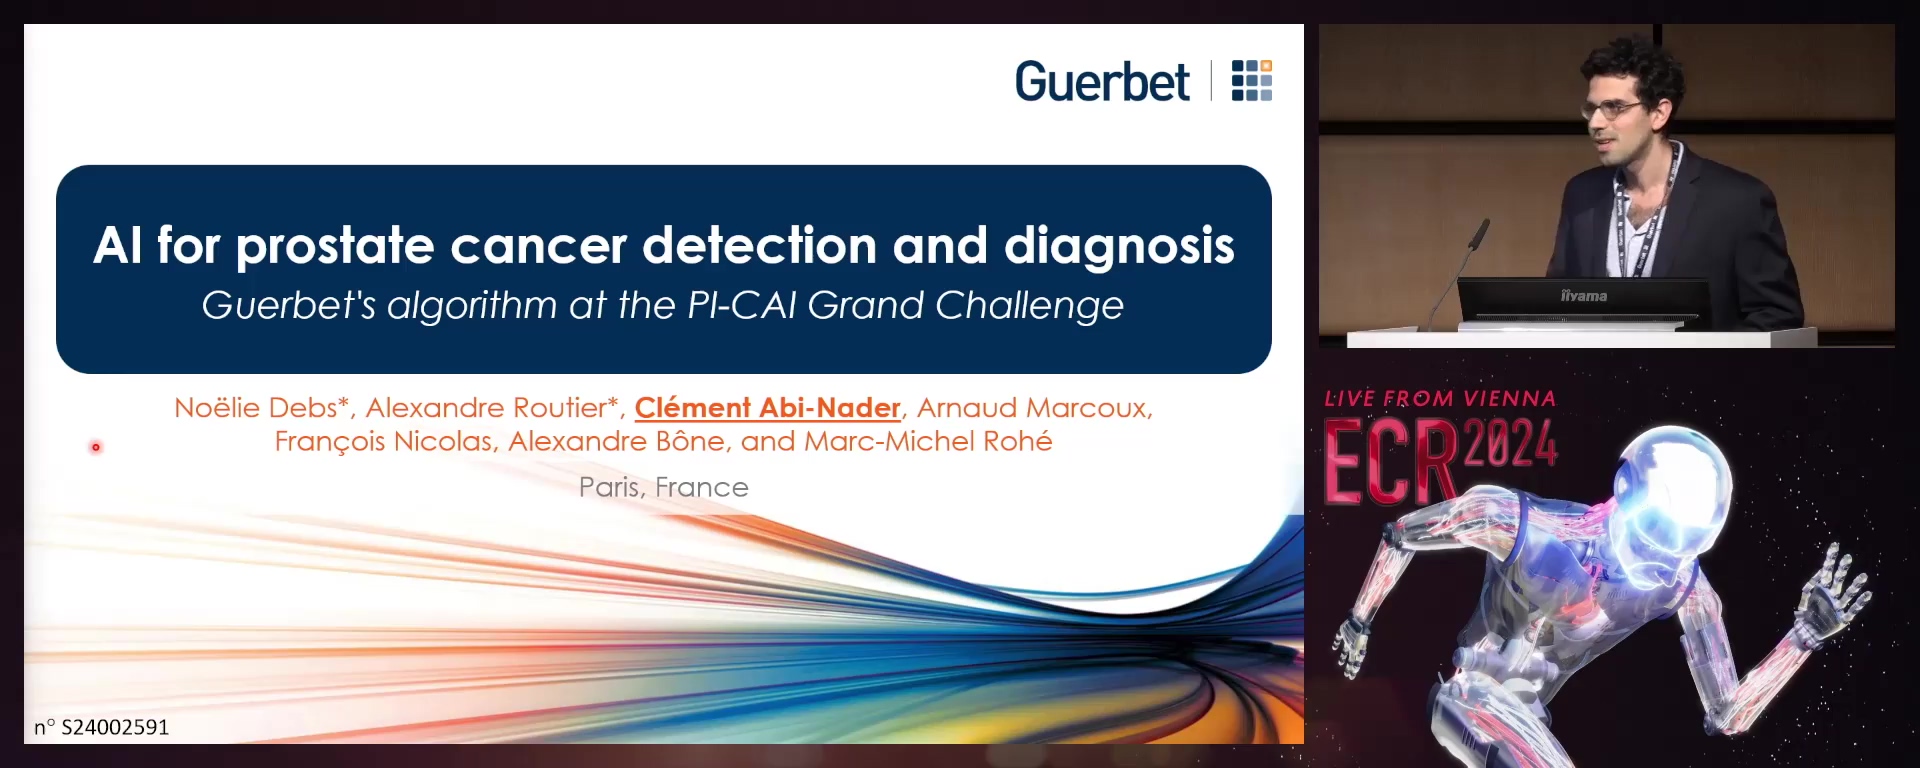 Artificial Intelligence and Radiologists at Prostate Cancer Detection in MRI : Guerbet, Winner of the PI-CAI Challenge